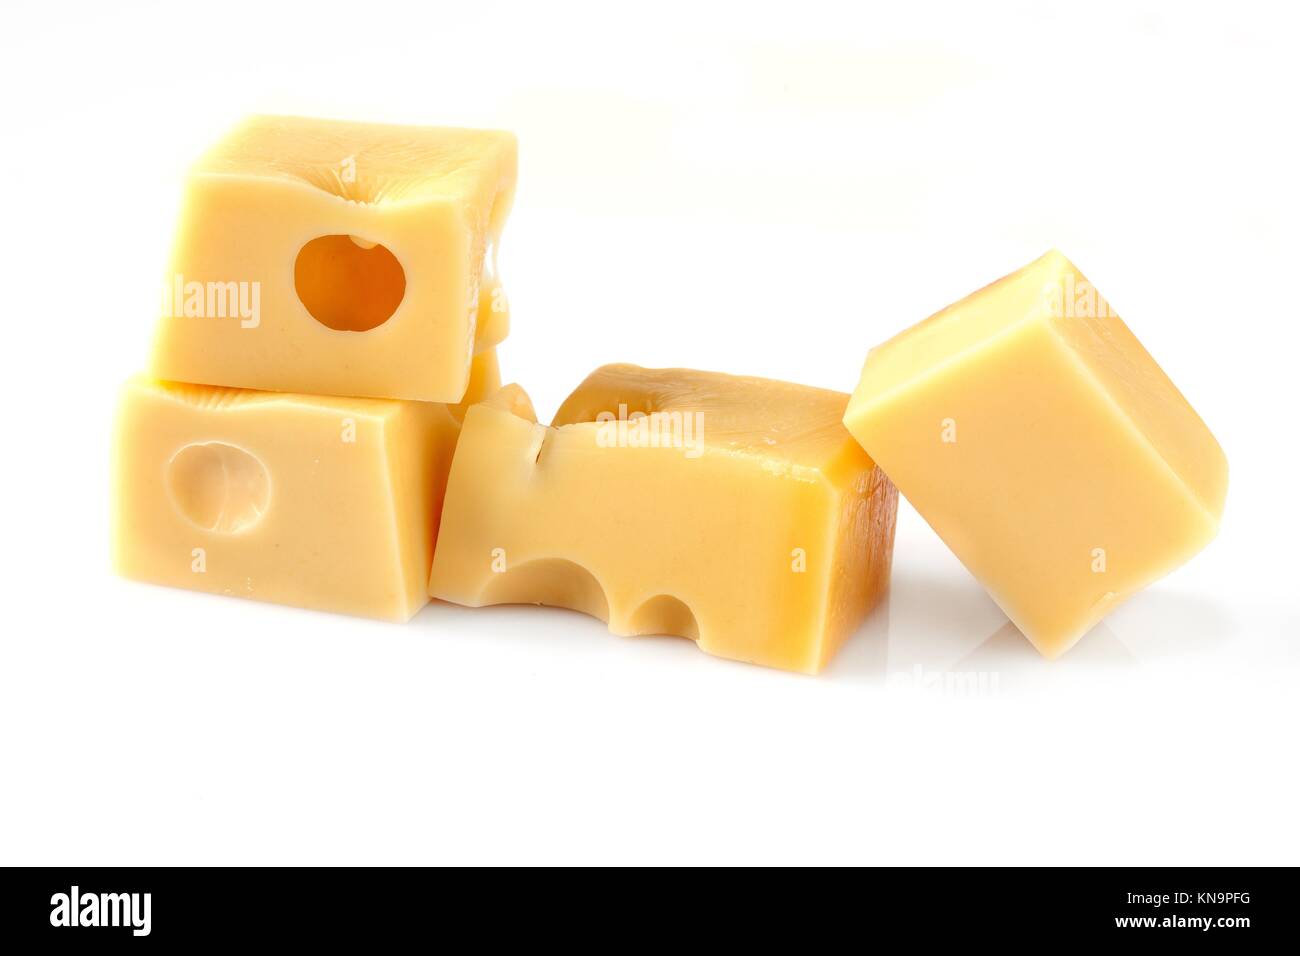 Pieces of Emmental swiss cheese, isolated on white background. Stock Photo